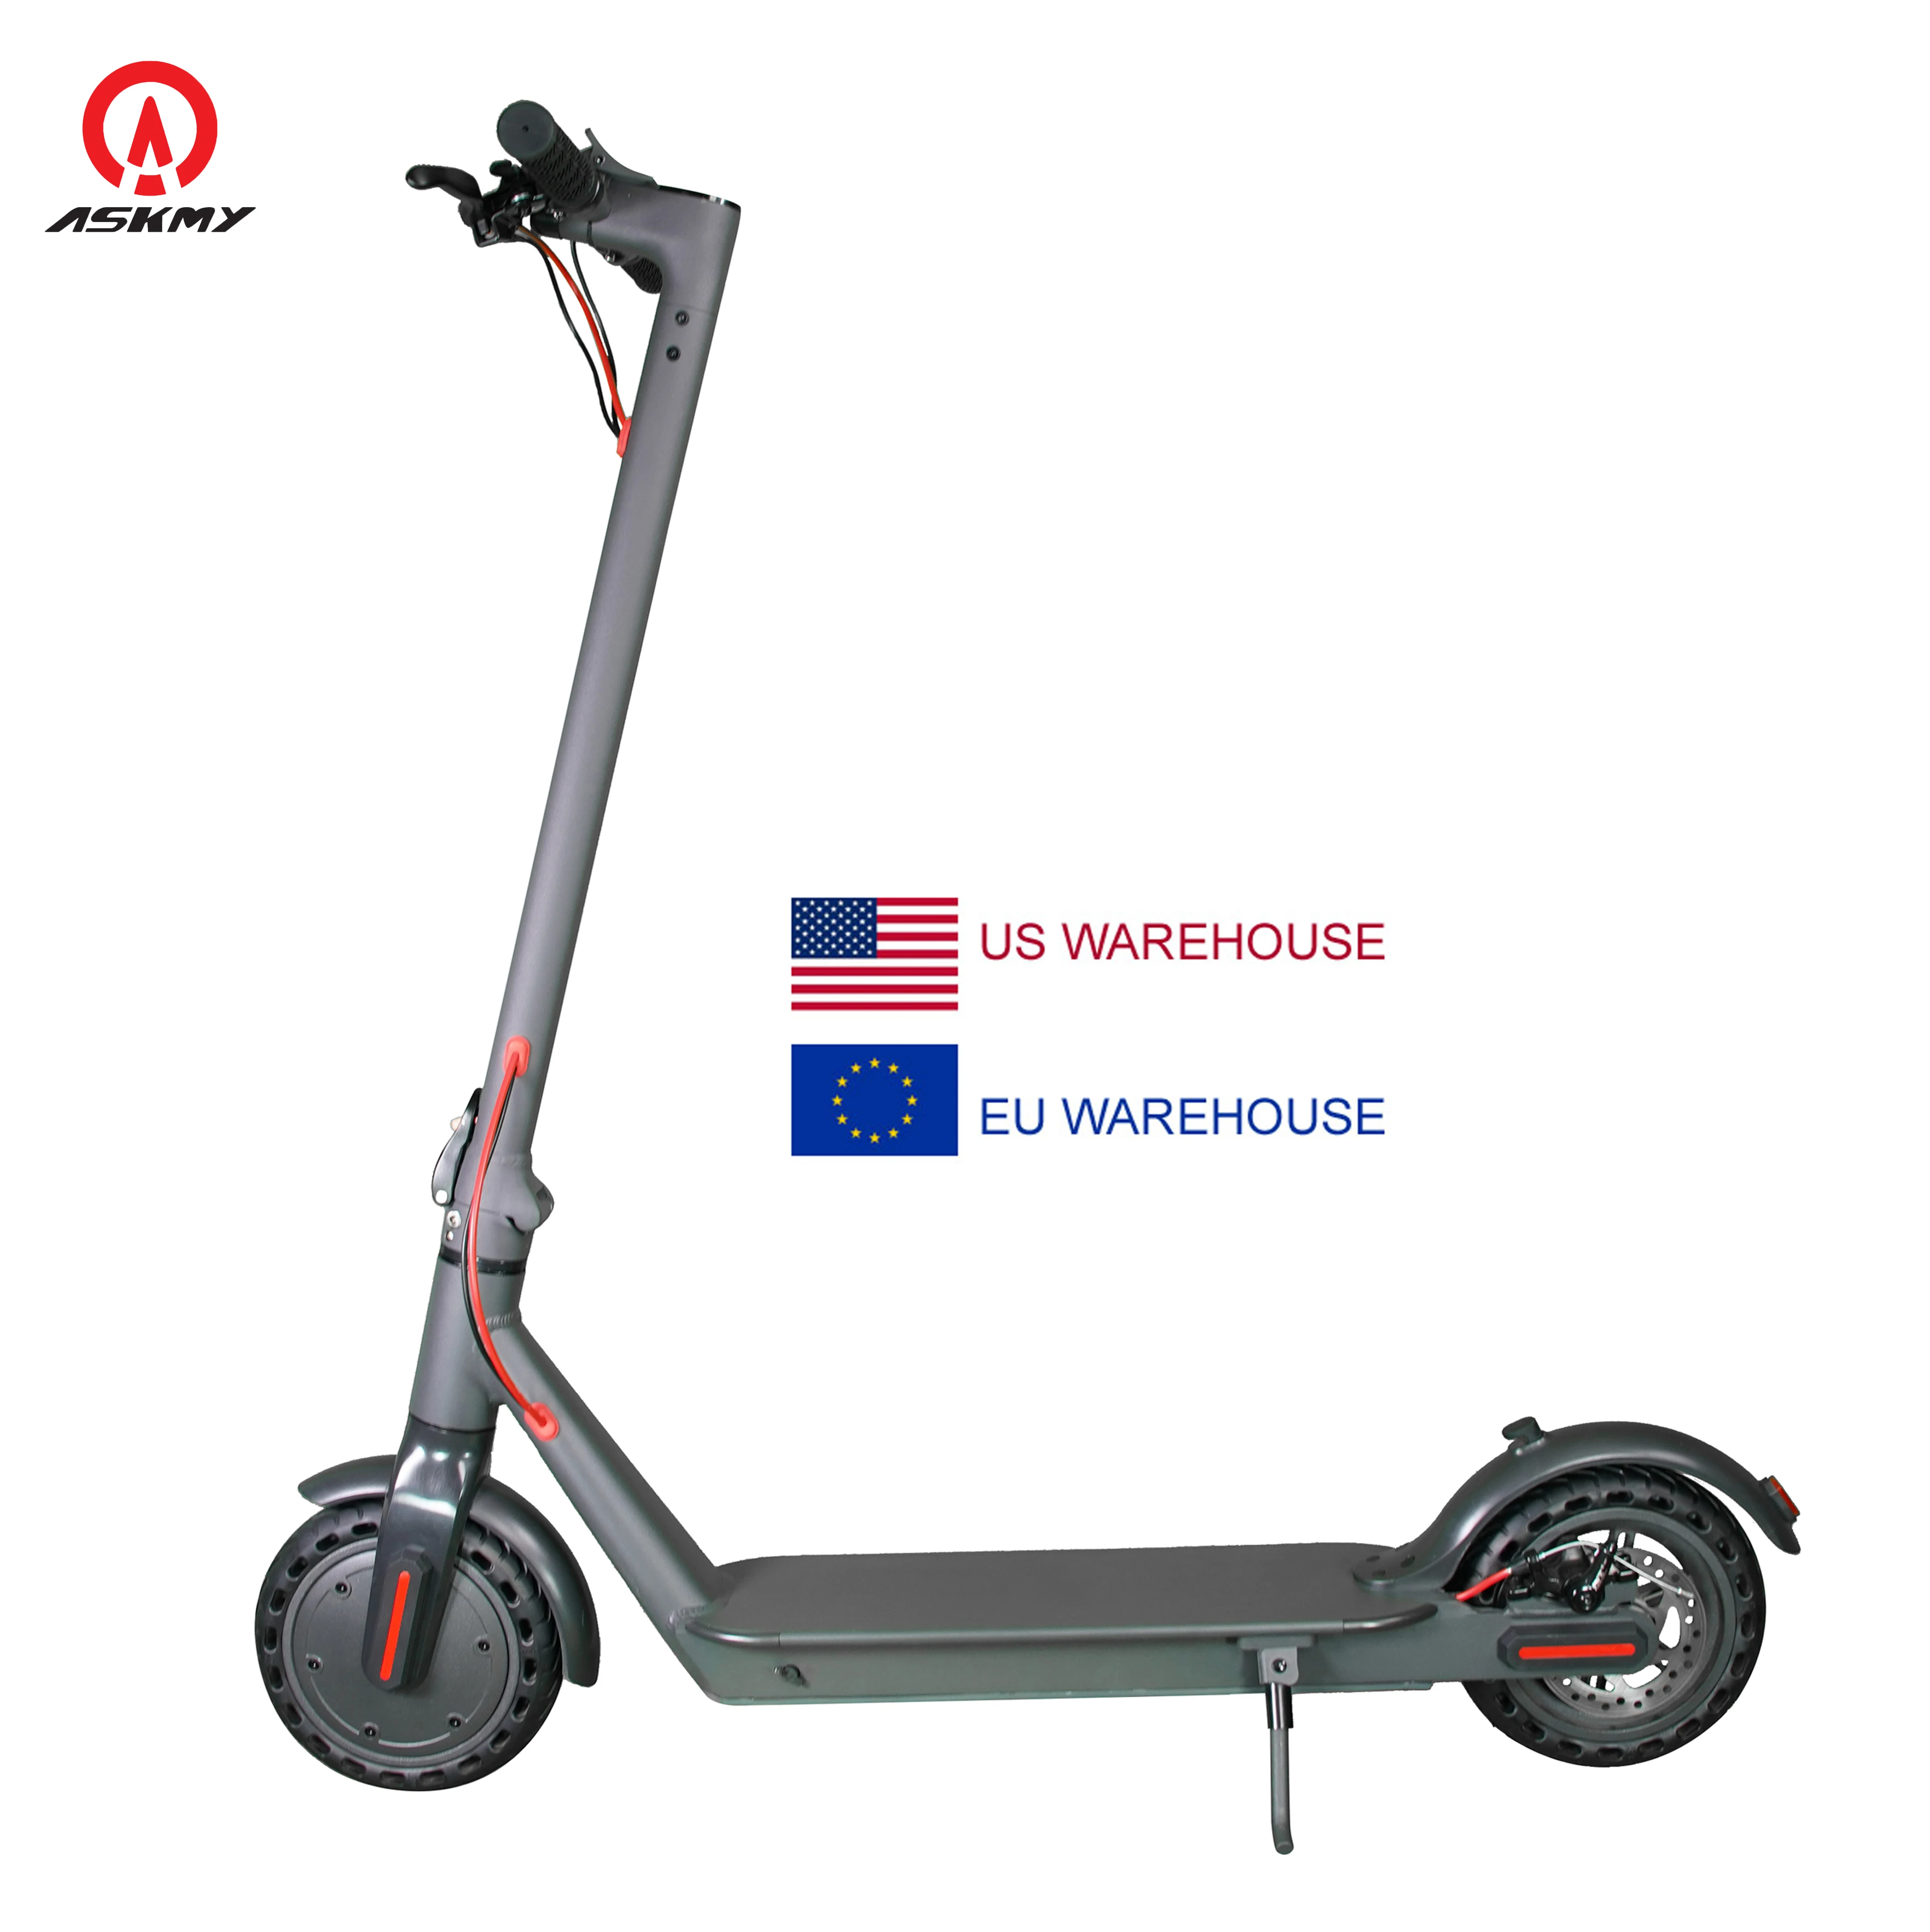 

European USA Warehouse ASKMY EH100 Portable Folding Electric Scooters 8.5 inch 2 Wheel Kick Scooter Fast Adult E Scooters